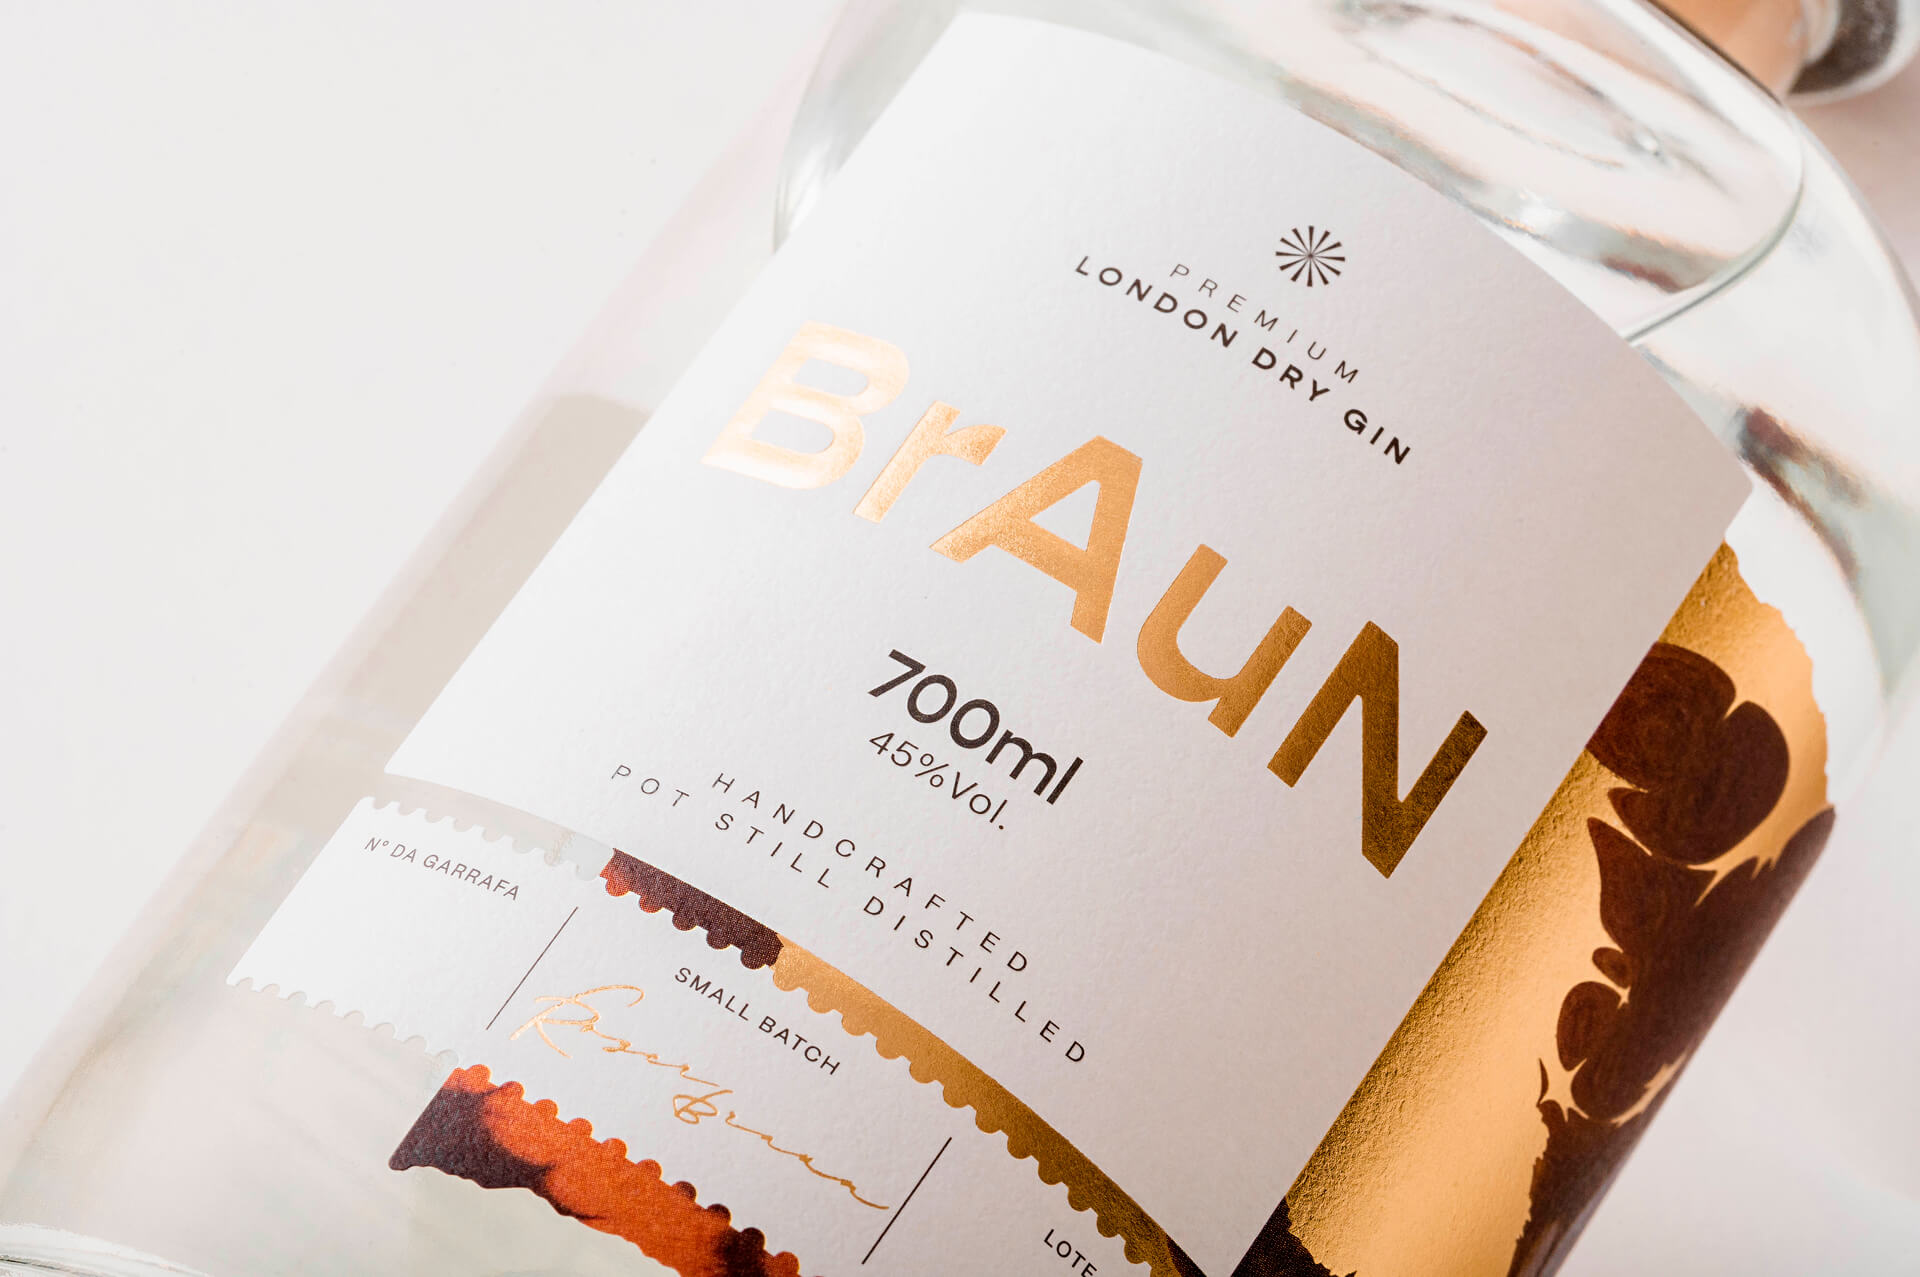 BrAuN Gin Packaging and Identity Created by Ismo Design